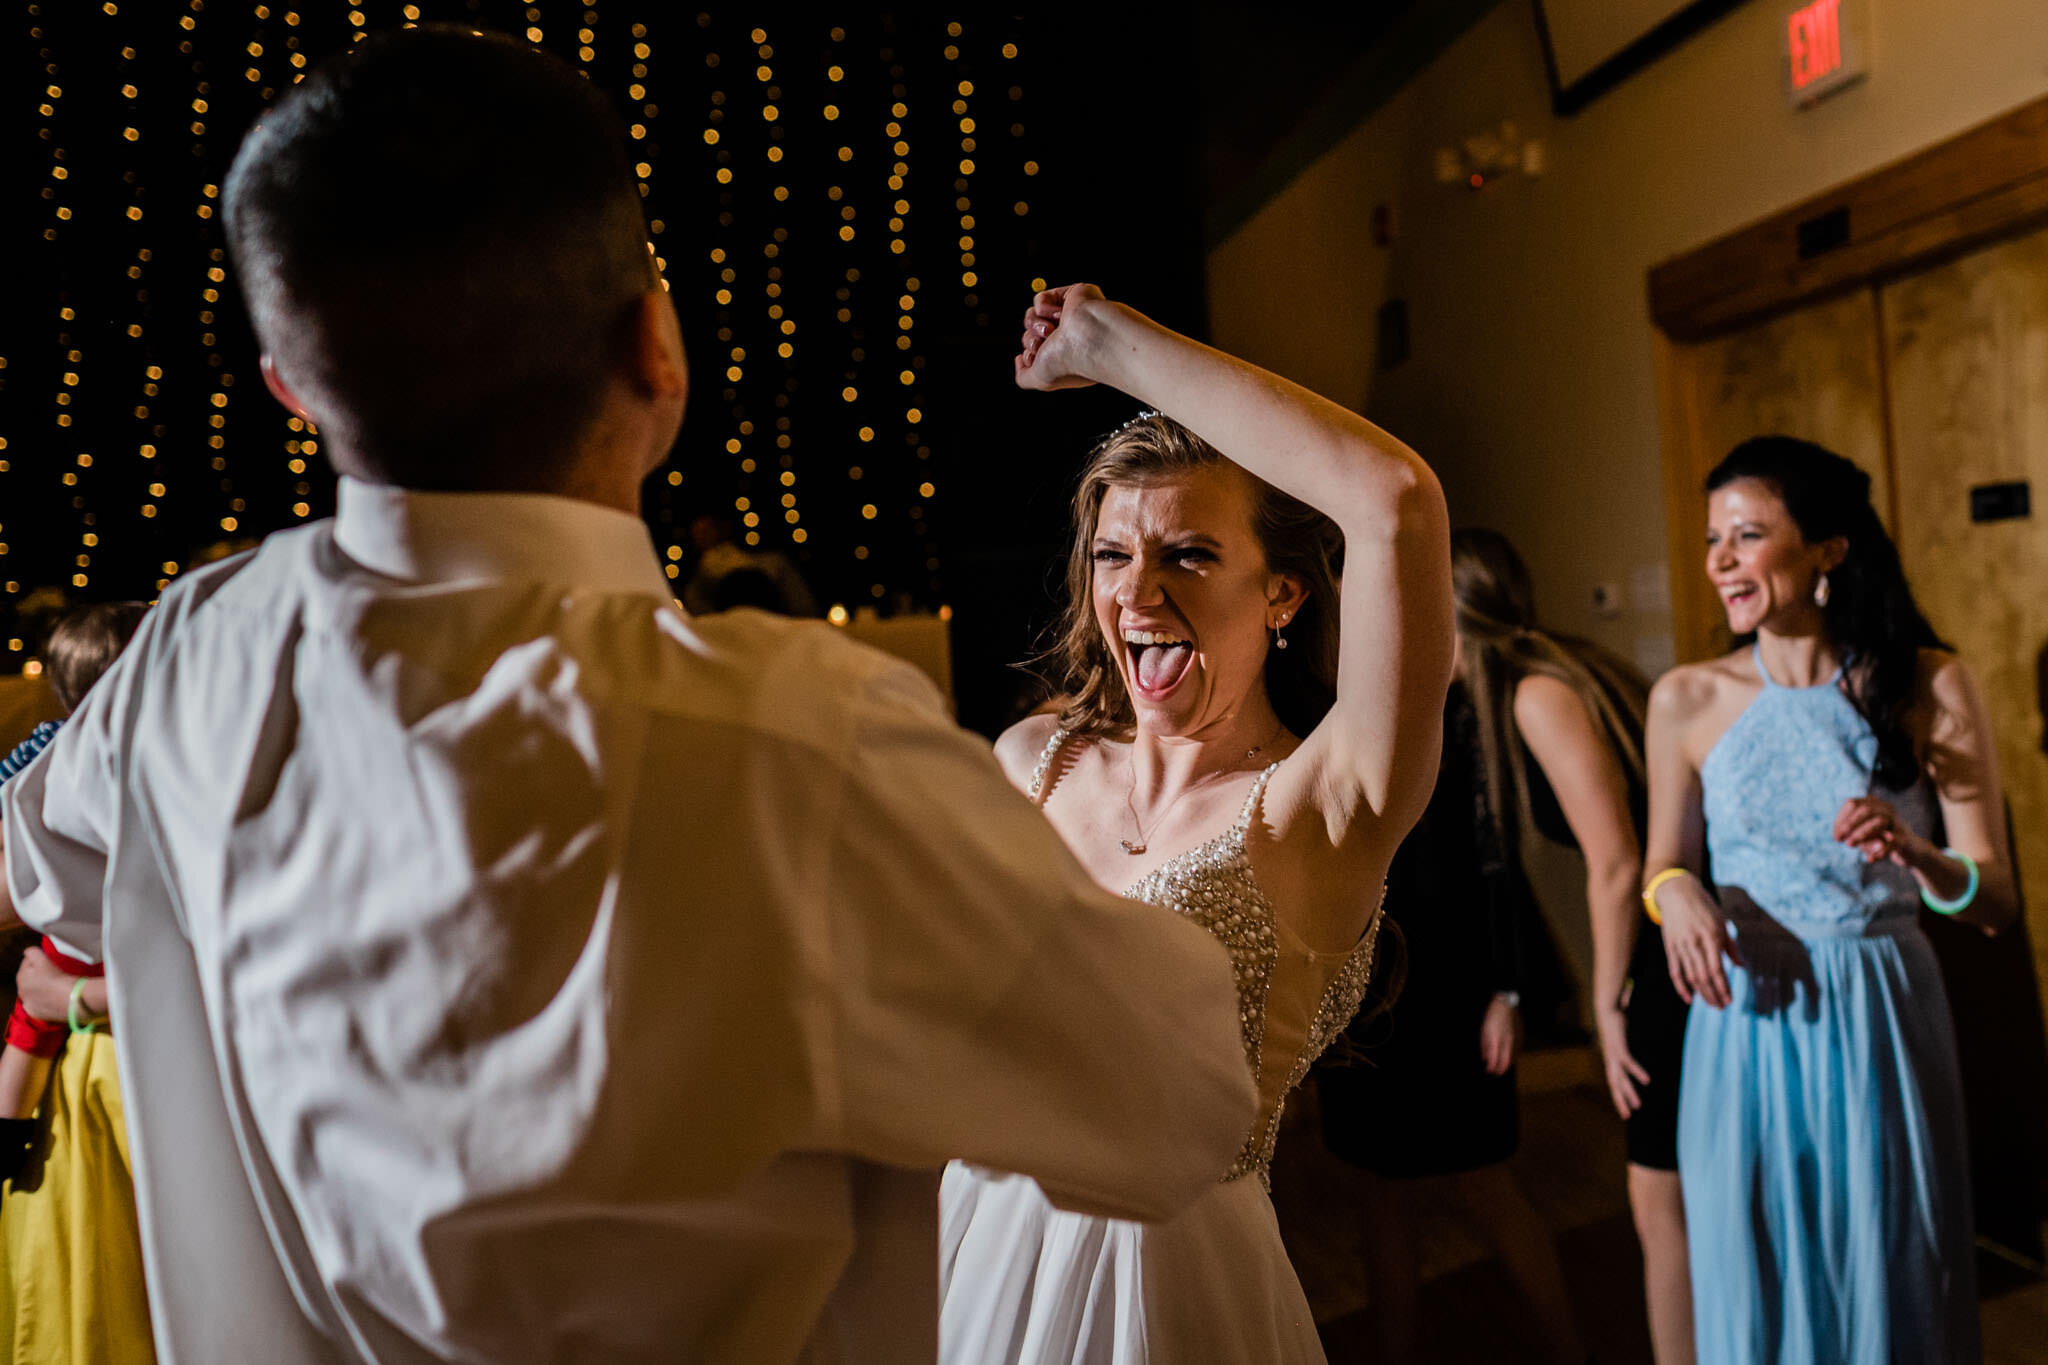 Durham Wedding Photographer | By G. Lin Photography | Bride waving arms in the air and laughing